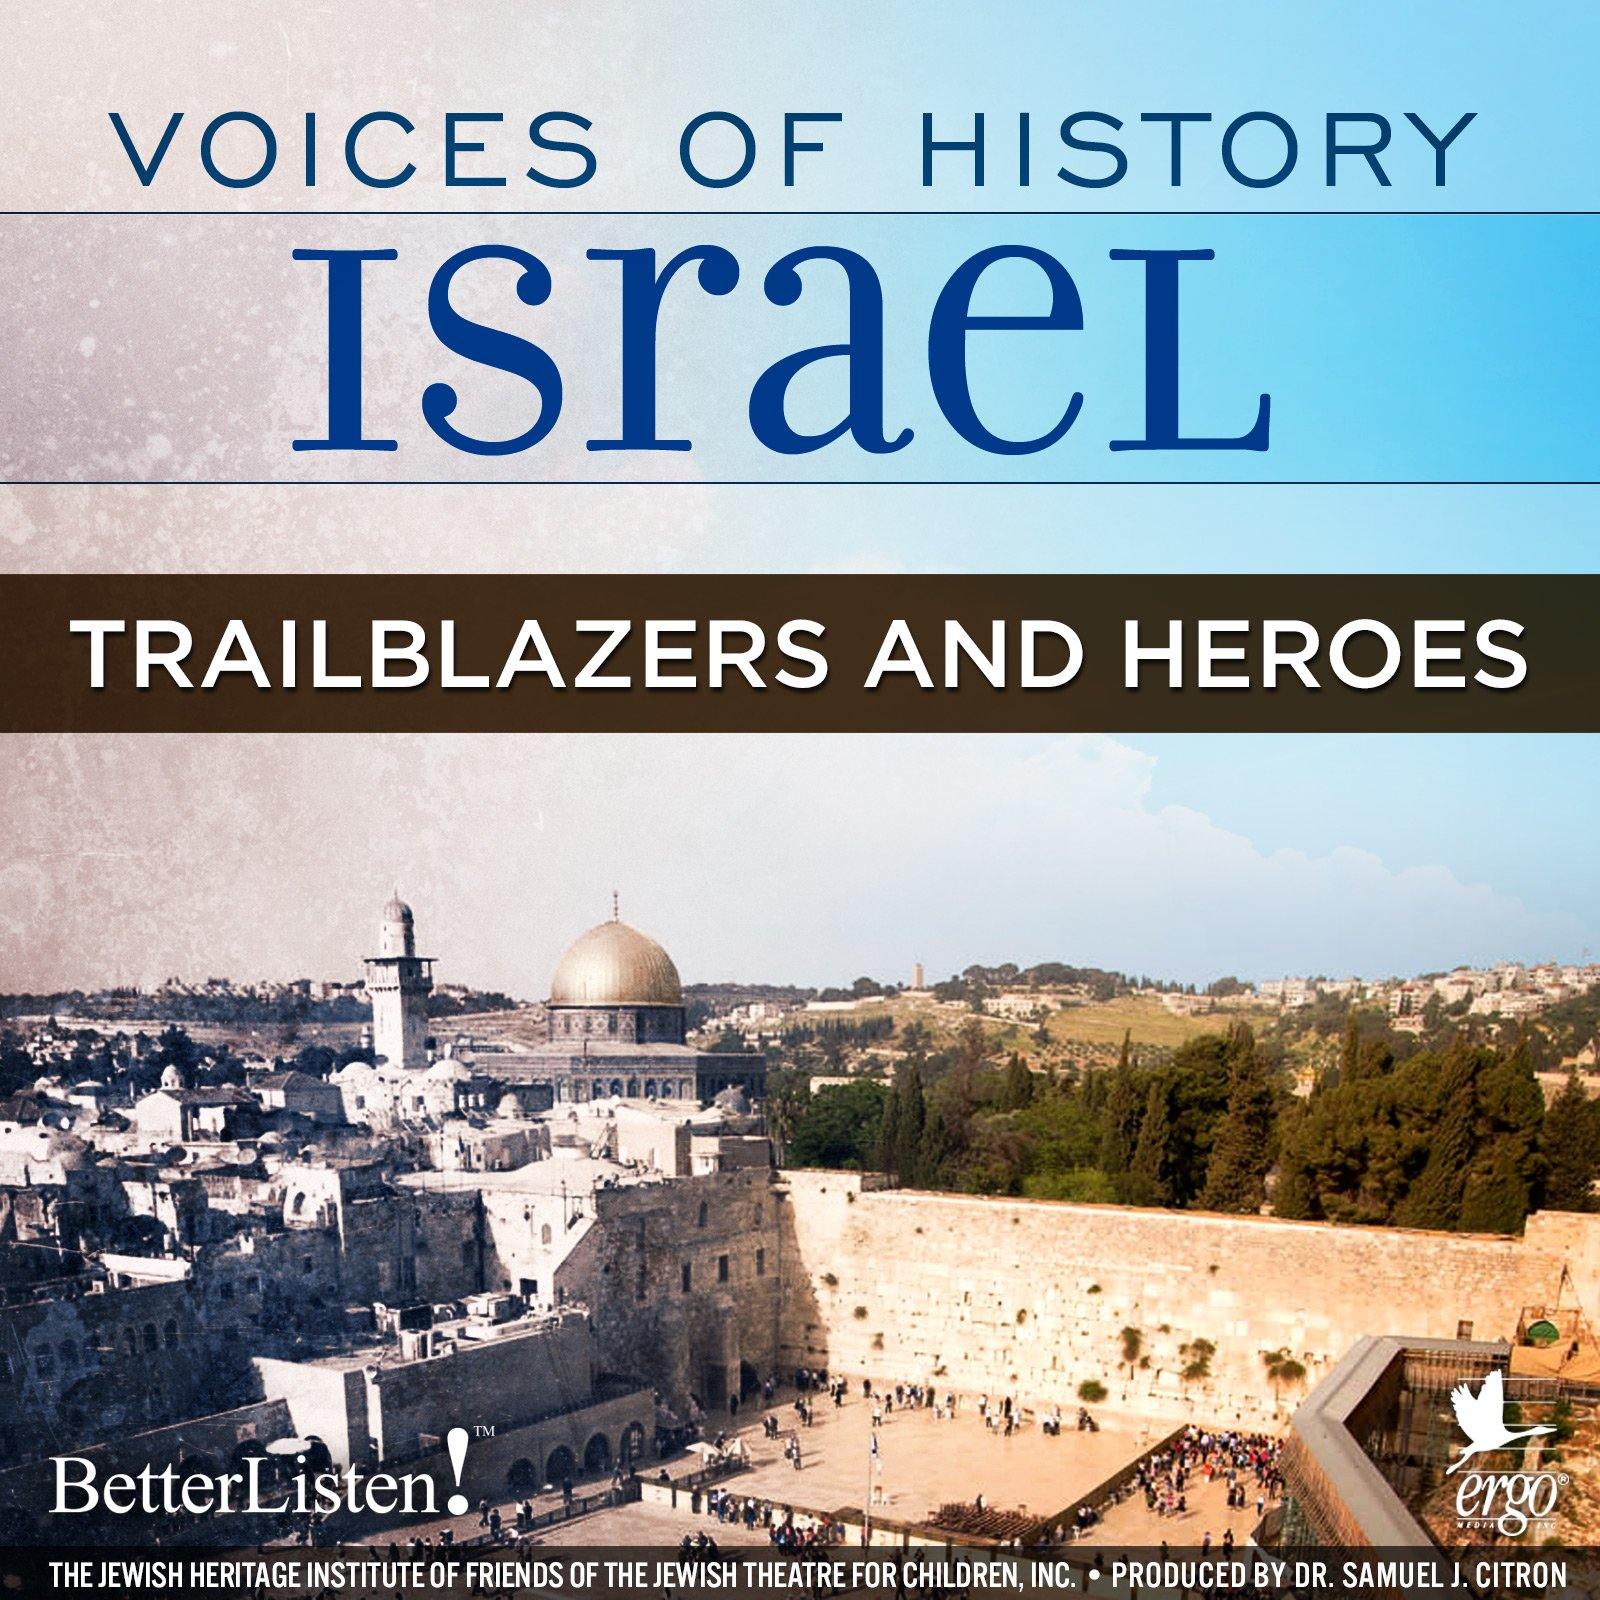 Voices of History Israel: Trailblazers and Heroes - BetterListen!